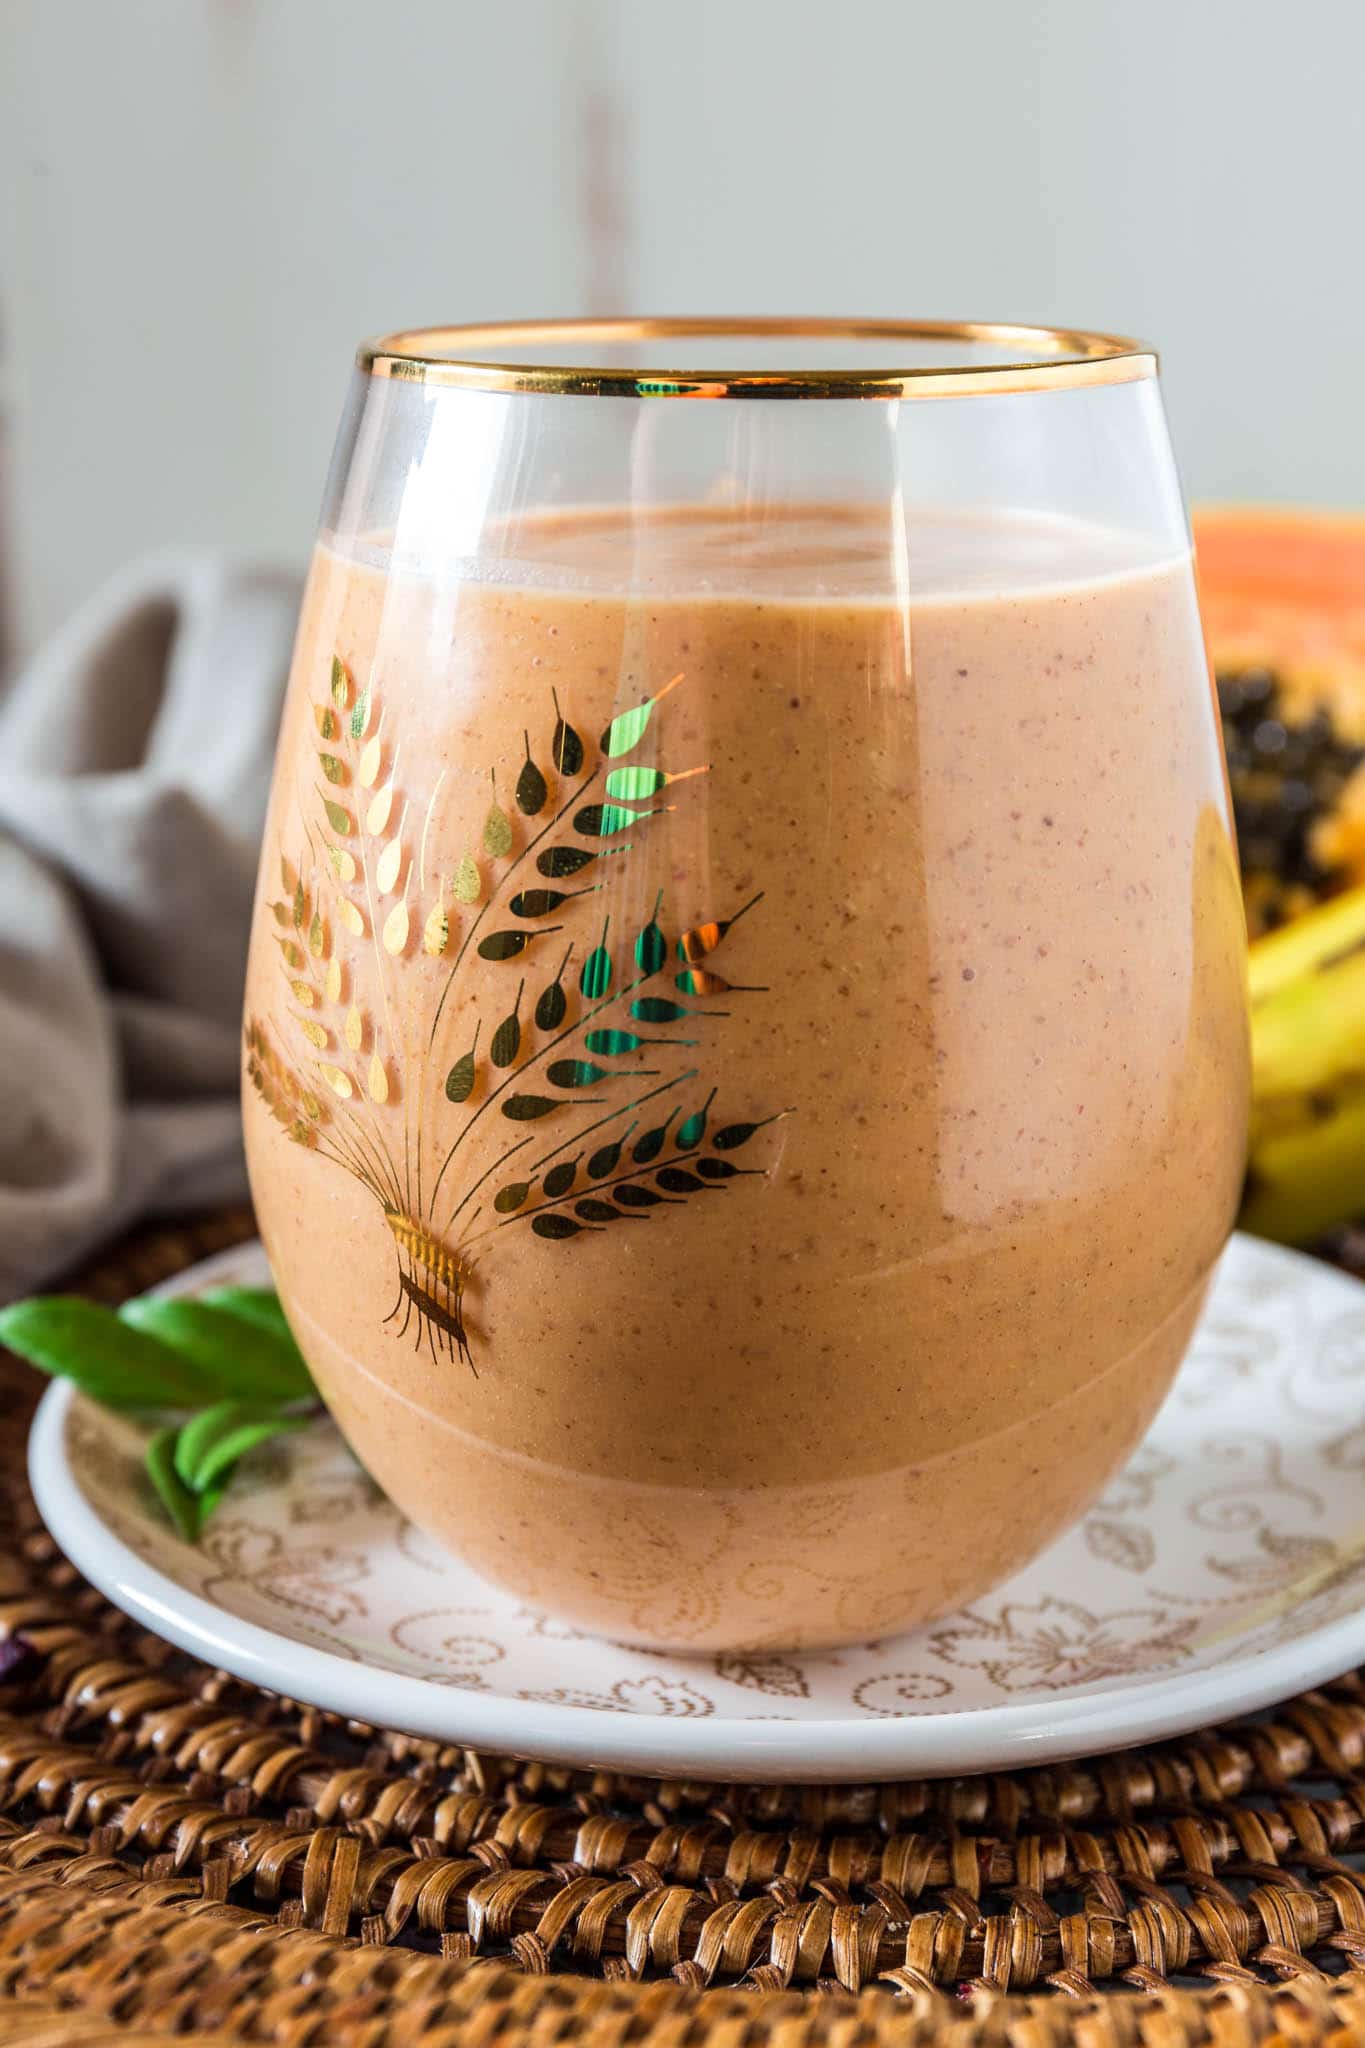 Holiday Detox Smoothie | www.oliviascuisine.com | Who said a detox smoothie has to taste awful? This delicious version is packed with nutrients and tastes like tropical paradise!